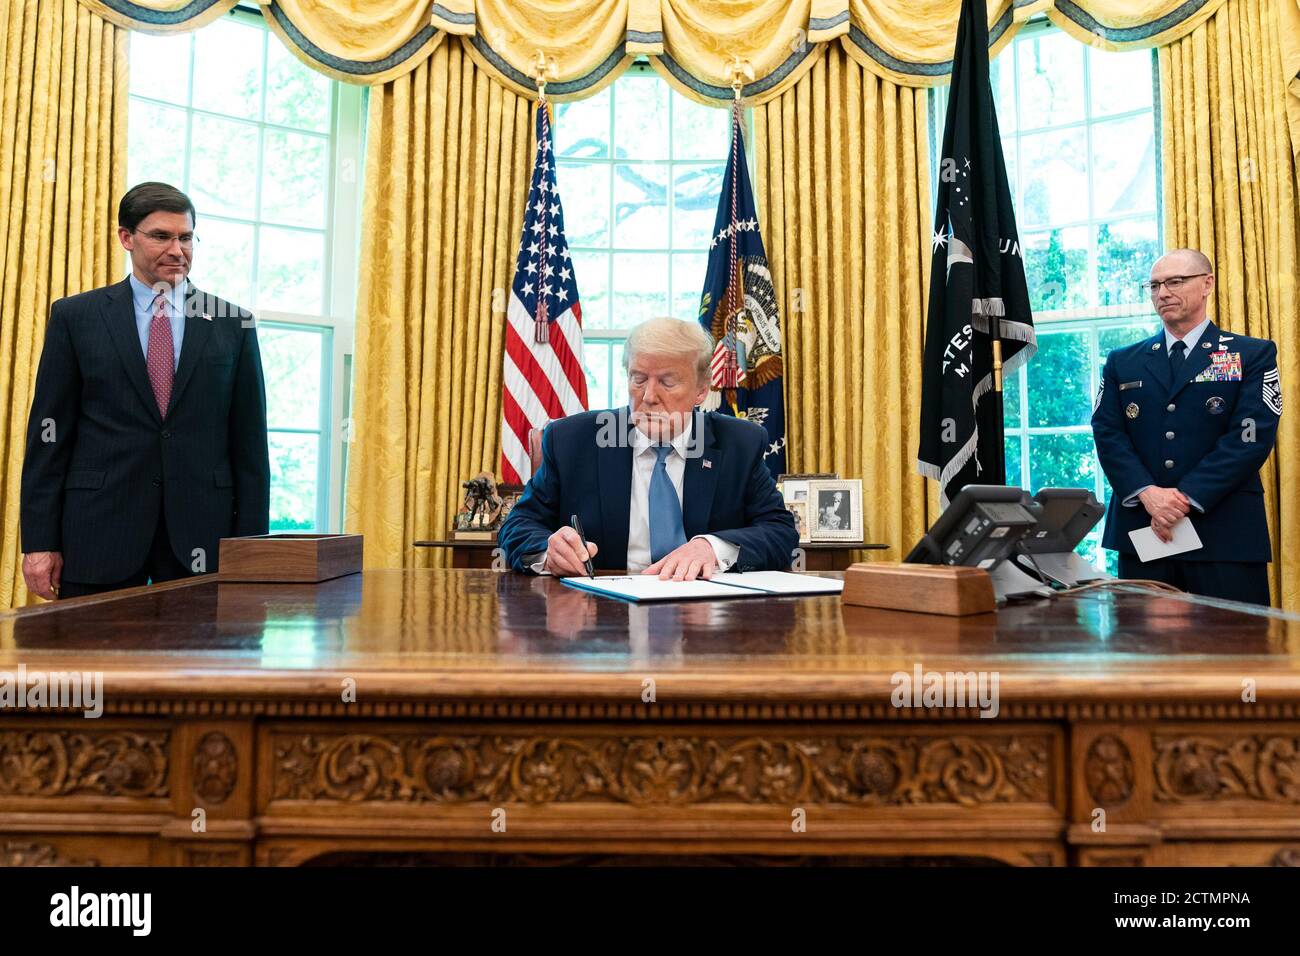 President Trump Signs an Armed Forces Day Proclamation. President Donald J. Trump, joined by Department of Defense Secretary Mark Esper and US Space Force Senior Enlisted Advisor CMSgt Roger Towberman, signs an Armed Forces Day Proclamation Thursday, May 15, 2020, in the Oval Office of the White House. Stock Photo